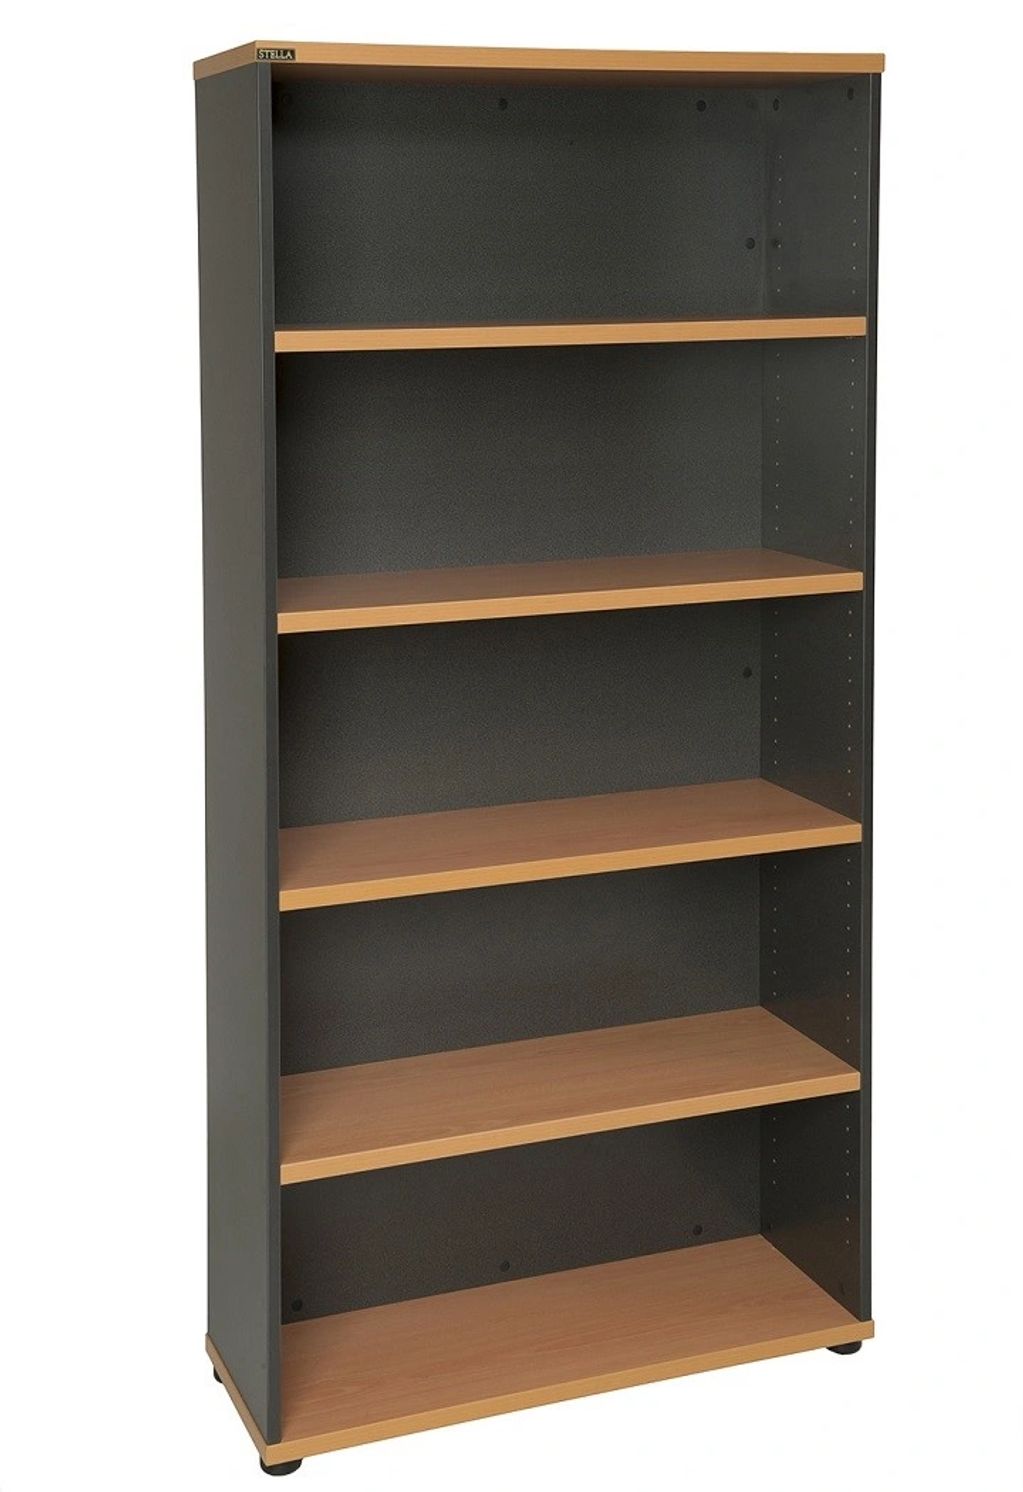  Bookcase
1800 Height  $269.00
